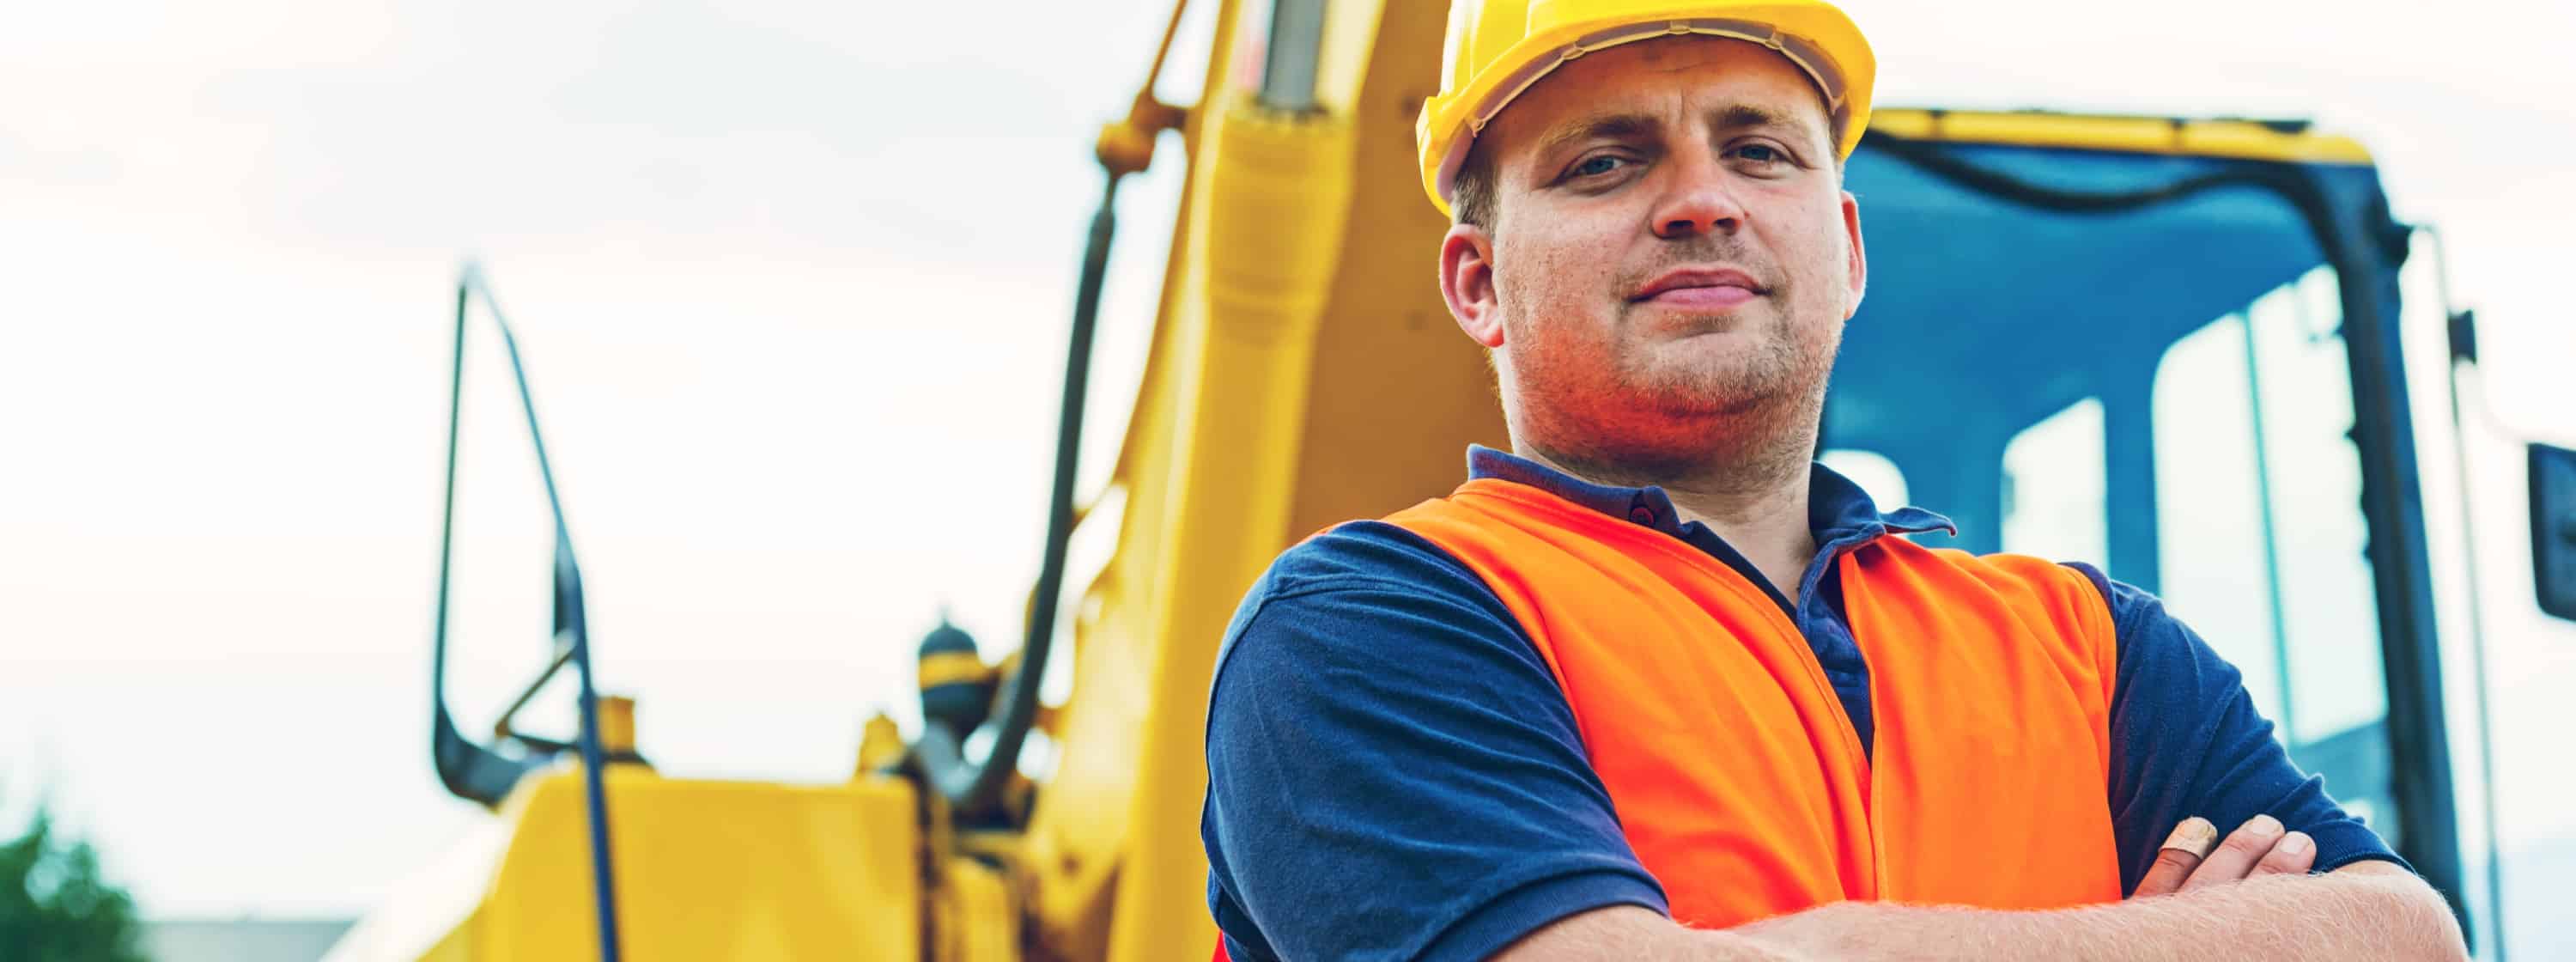 A construction worker in a yellow helmet standing in front of construction equipment